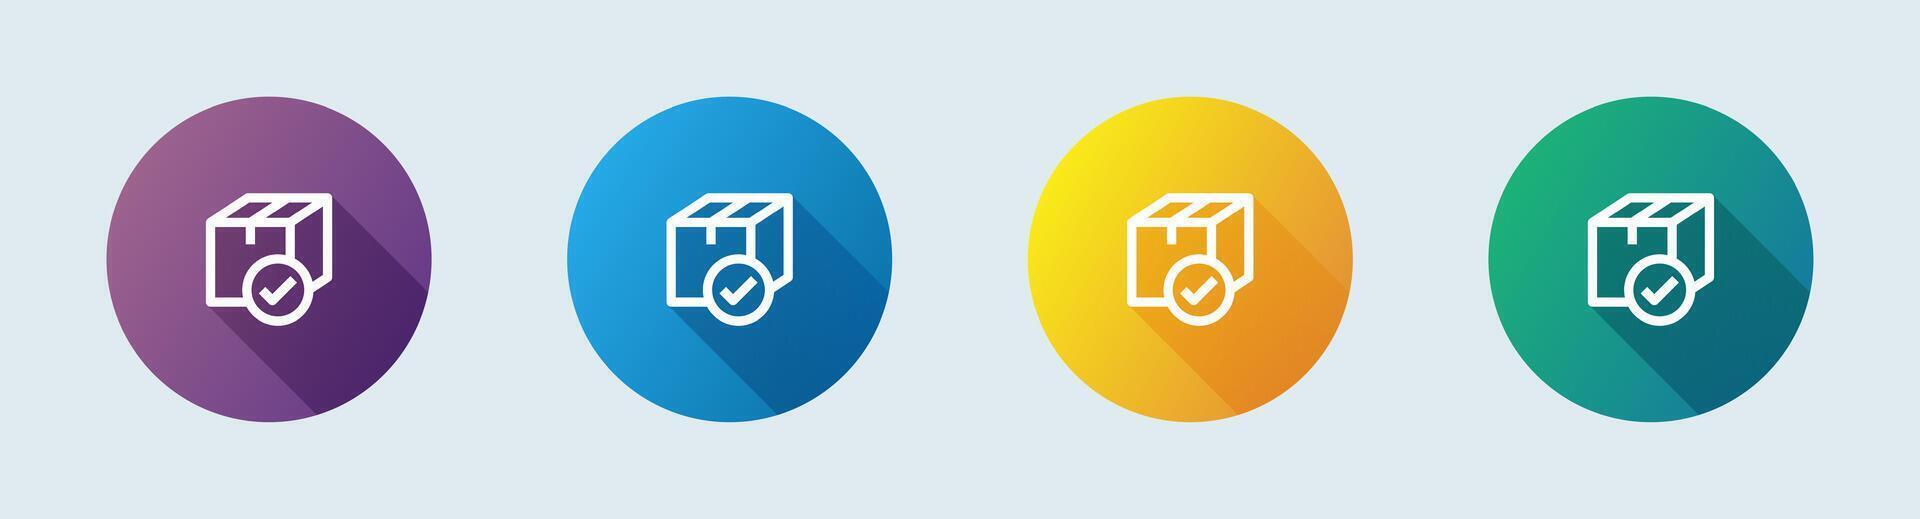 Delivered package line icon in flat design style. Box signs vector illustration.